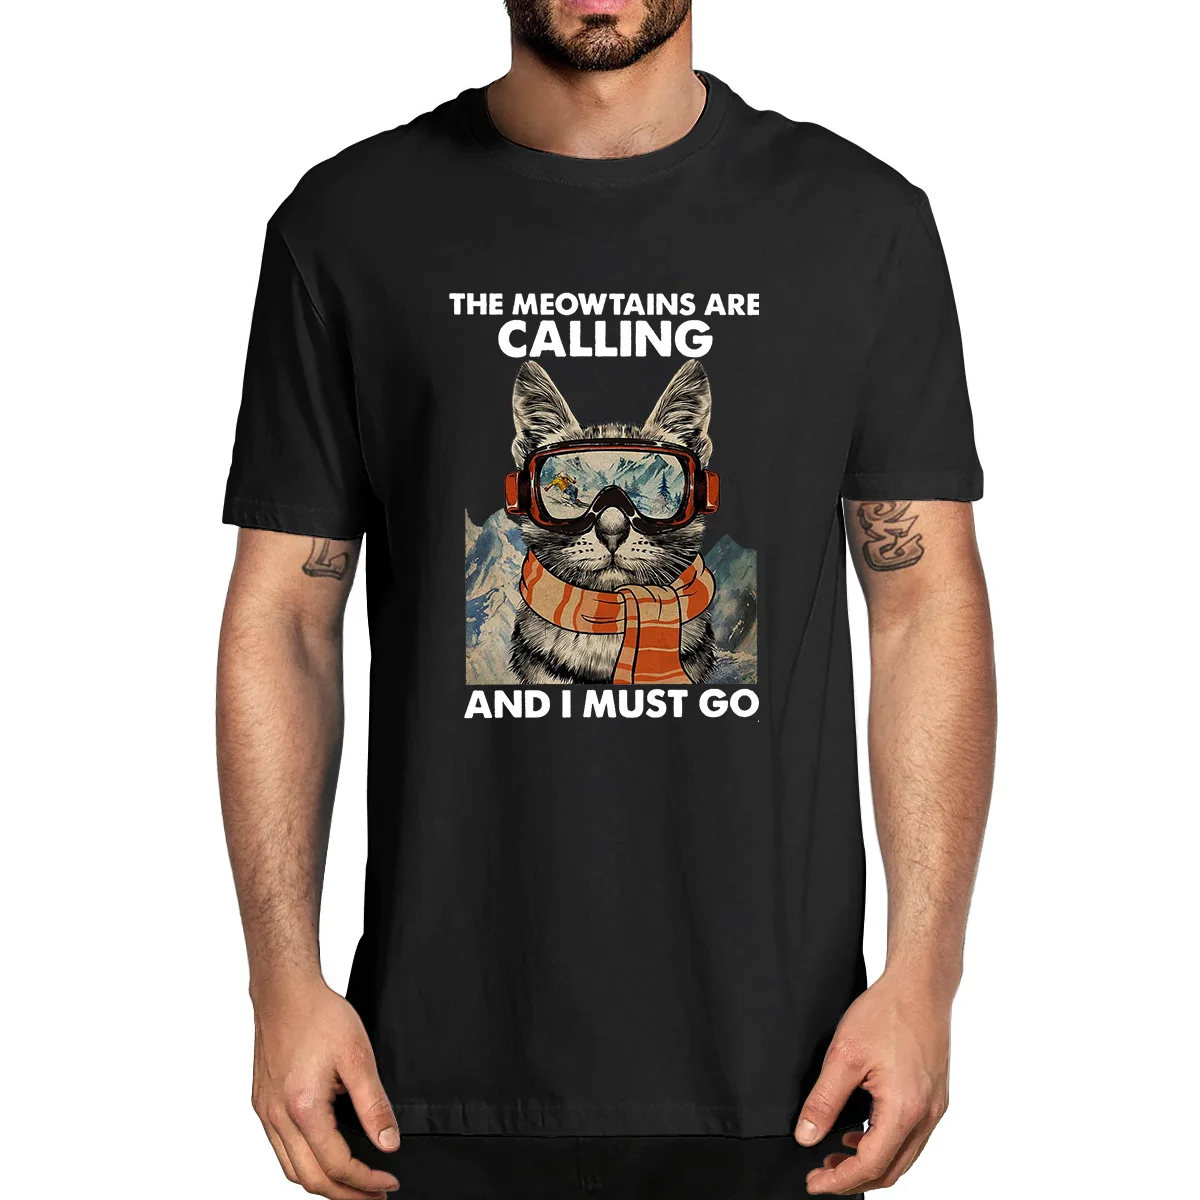 

Ski Skier Skiing Cat Lovers The Meowtains Are Calling And I Must Go Men's 100% Cotton Novelty T-Shirt Unisex Humor Streetwear